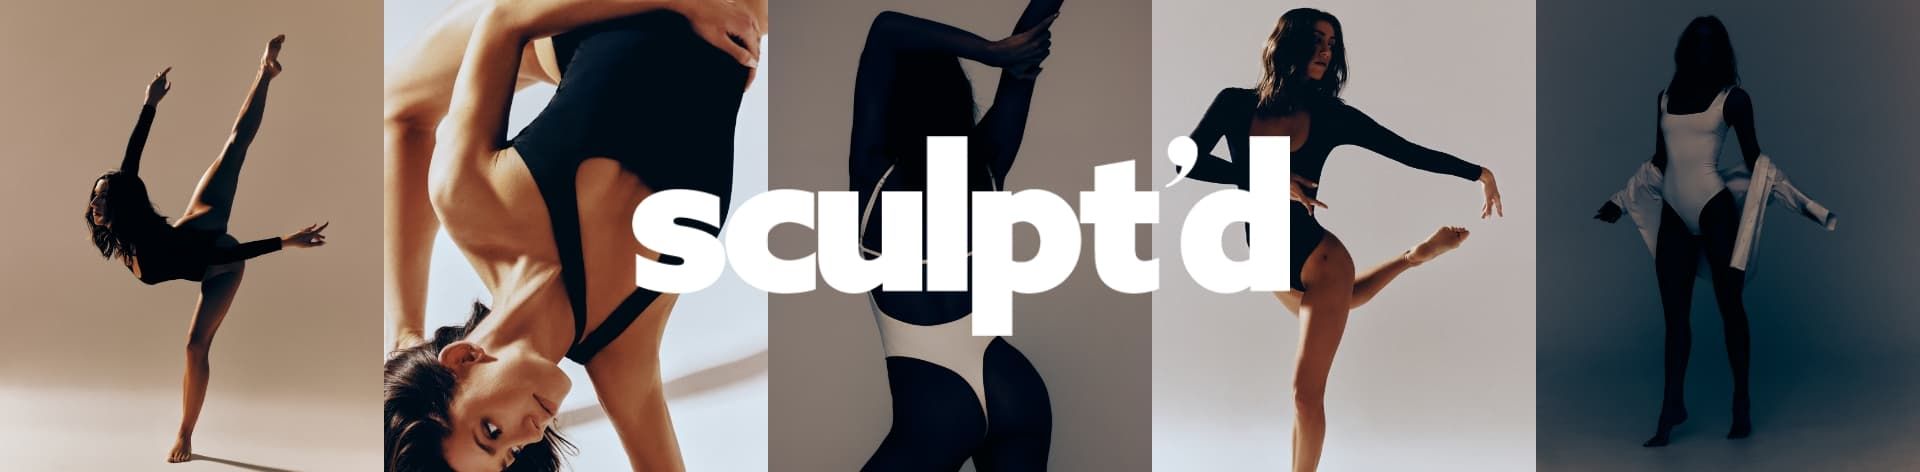 Models showcase the white and black sculpt bodysuits while demonstrating choreography.